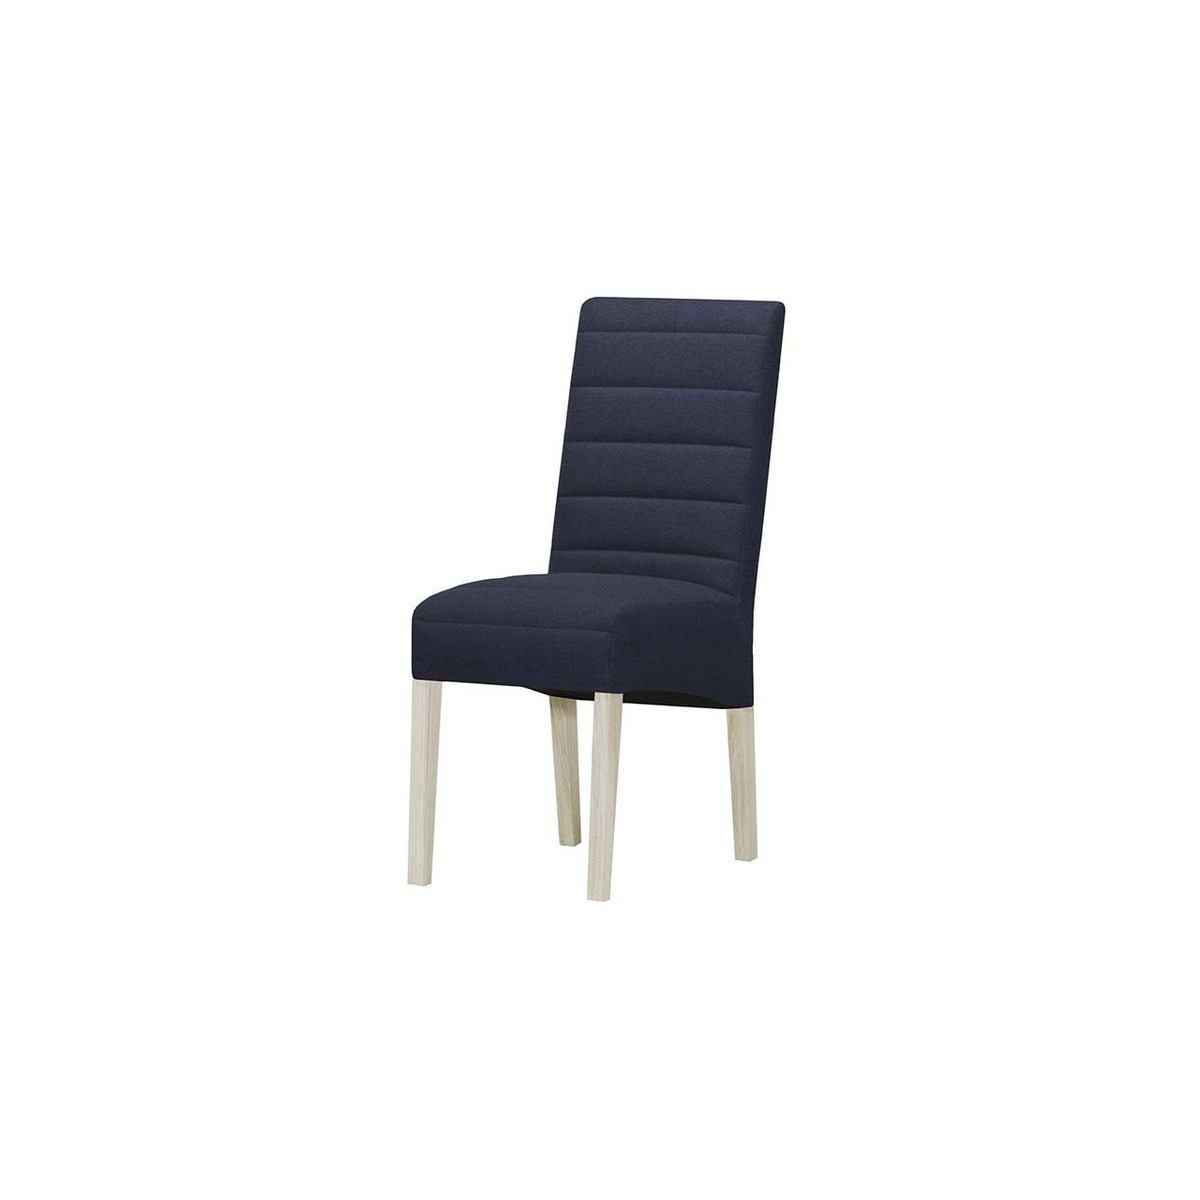 Sonitag Dining Chair, navy blue, Leg colour: white - image 1